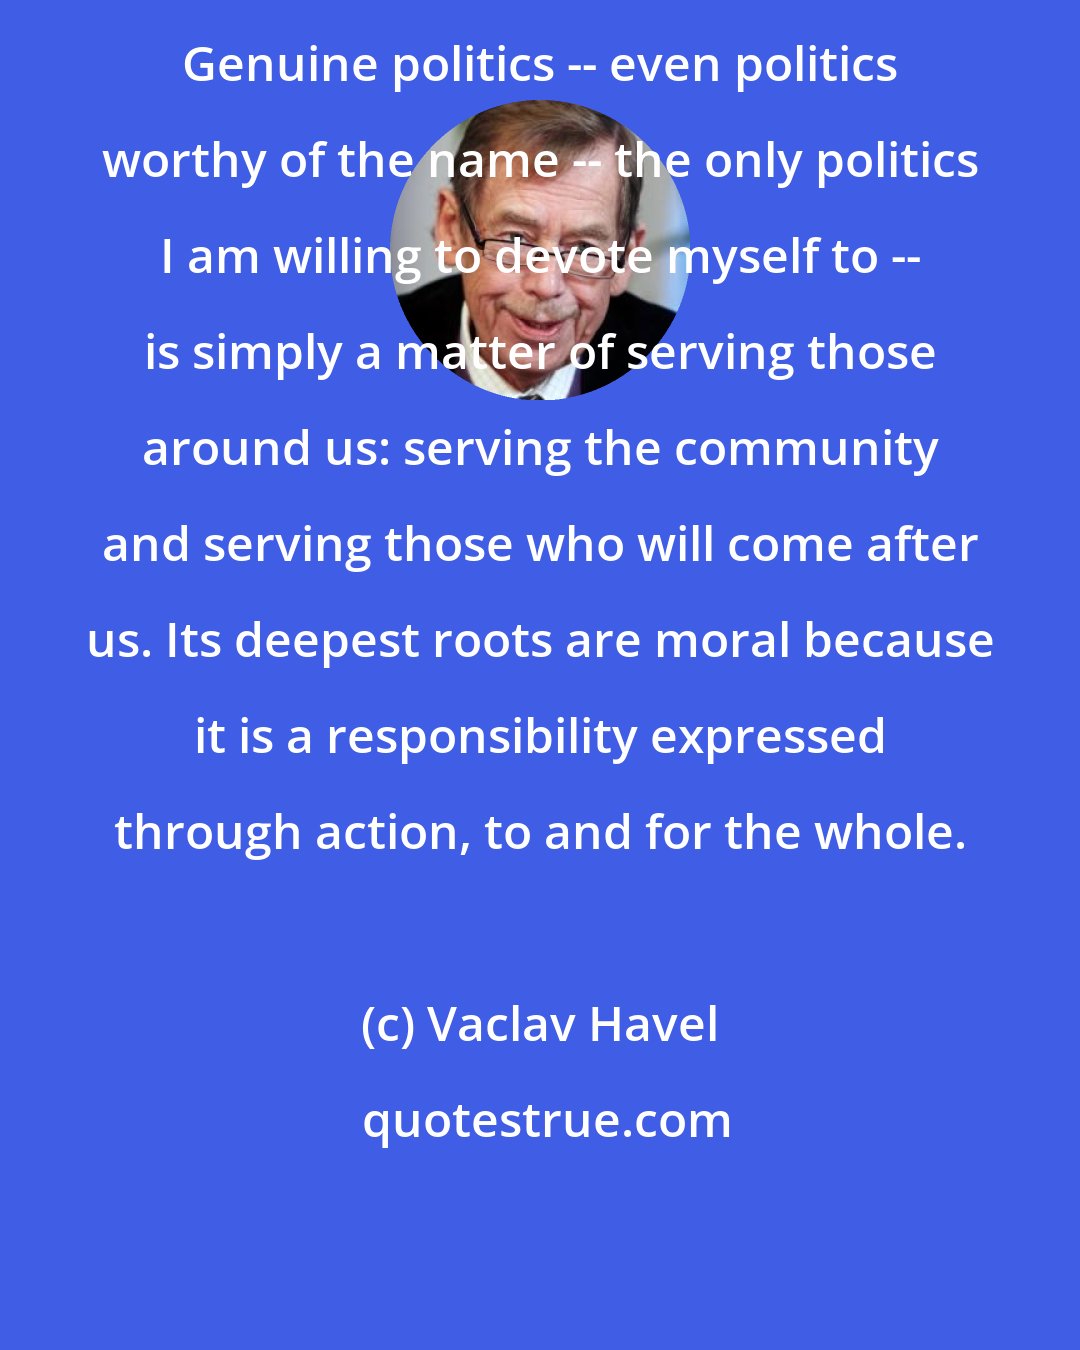 Vaclav Havel: Genuine politics -- even politics worthy of the name -- the only politics I am willing to devote myself to -- is simply a matter of serving those around us: serving the community and serving those who will come after us. Its deepest roots are moral because it is a responsibility expressed through action, to and for the whole.